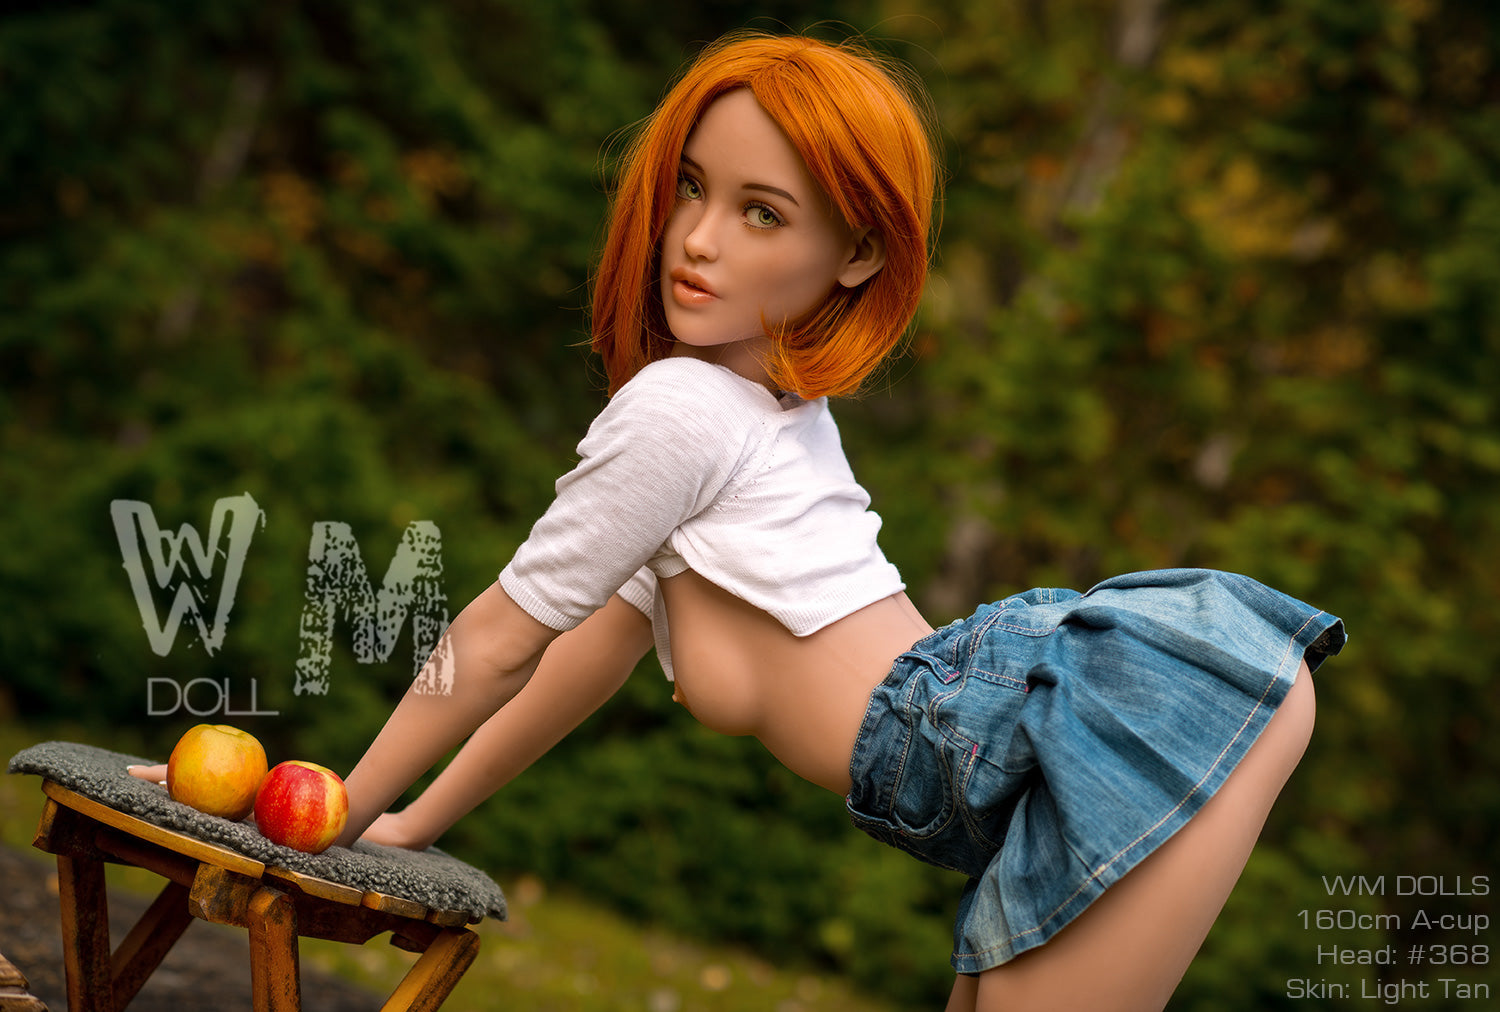 WM DOLL 160 CM A TPE - Lily | Buy Sex Dolls at DOLLS ACTUALLY